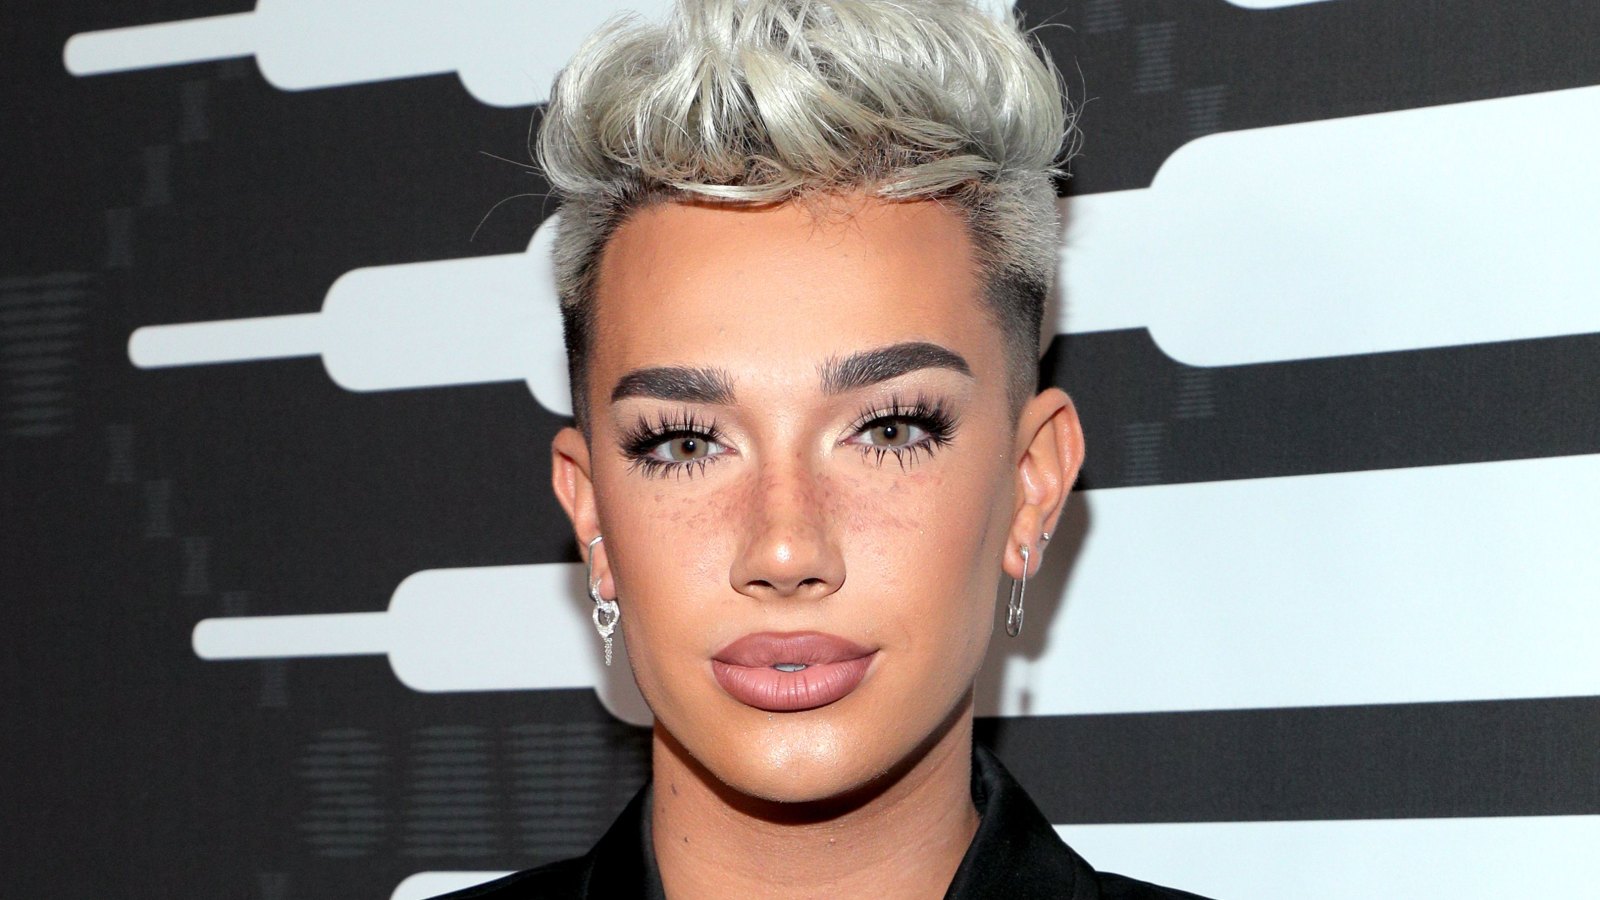 James Charles Claps Back at Claims He Is Transphobic After Post About Being Drafted in War